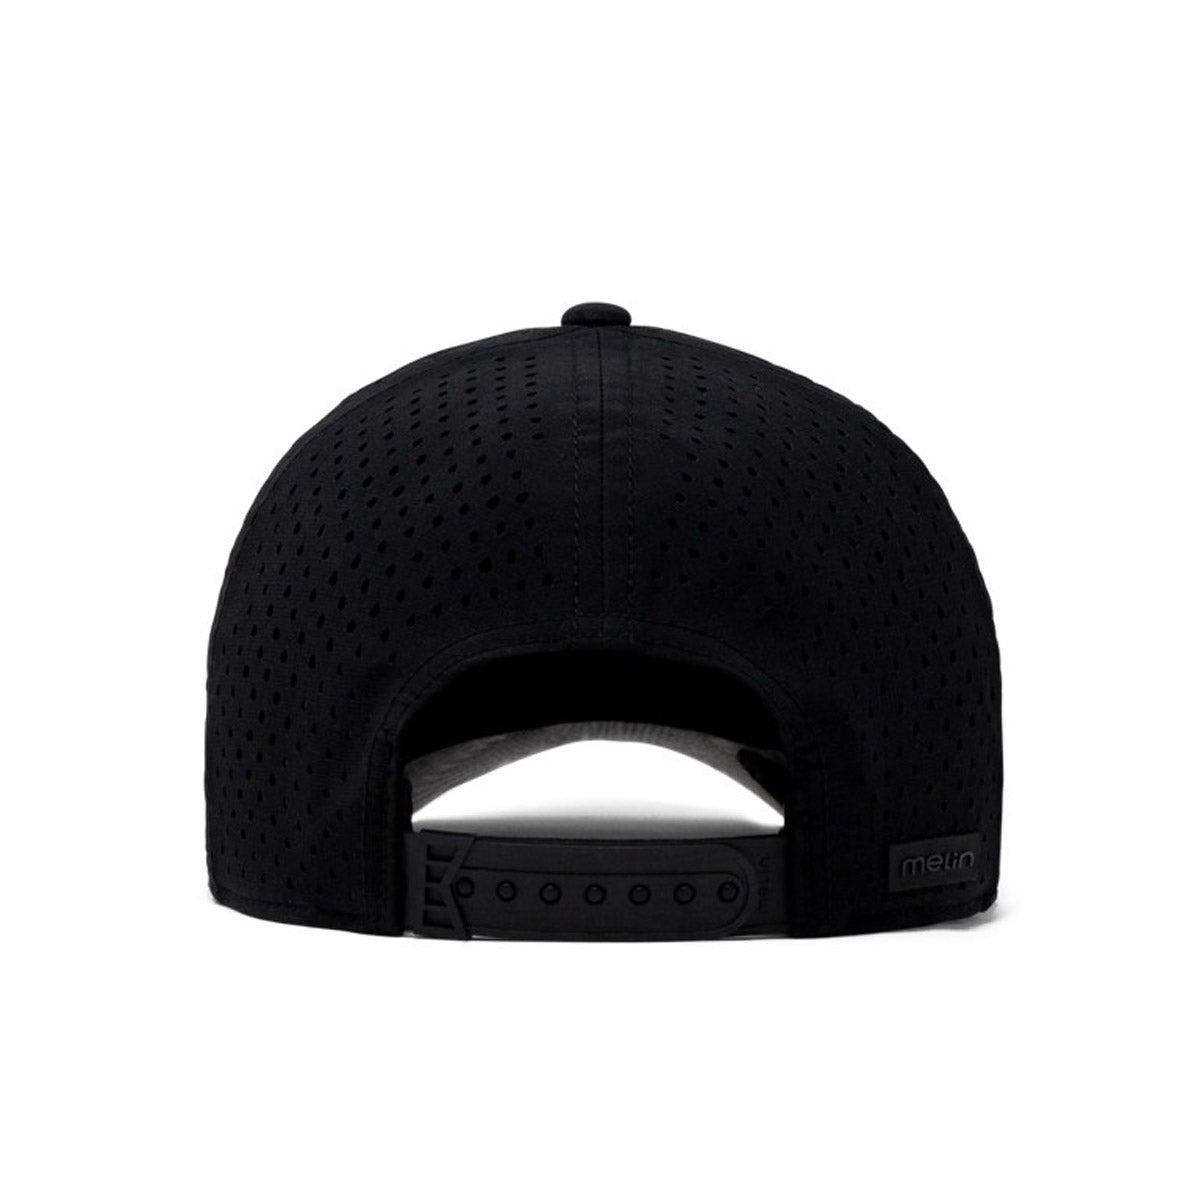 Melin: Hydro A-Game Performace Snapback Hat - BLACK